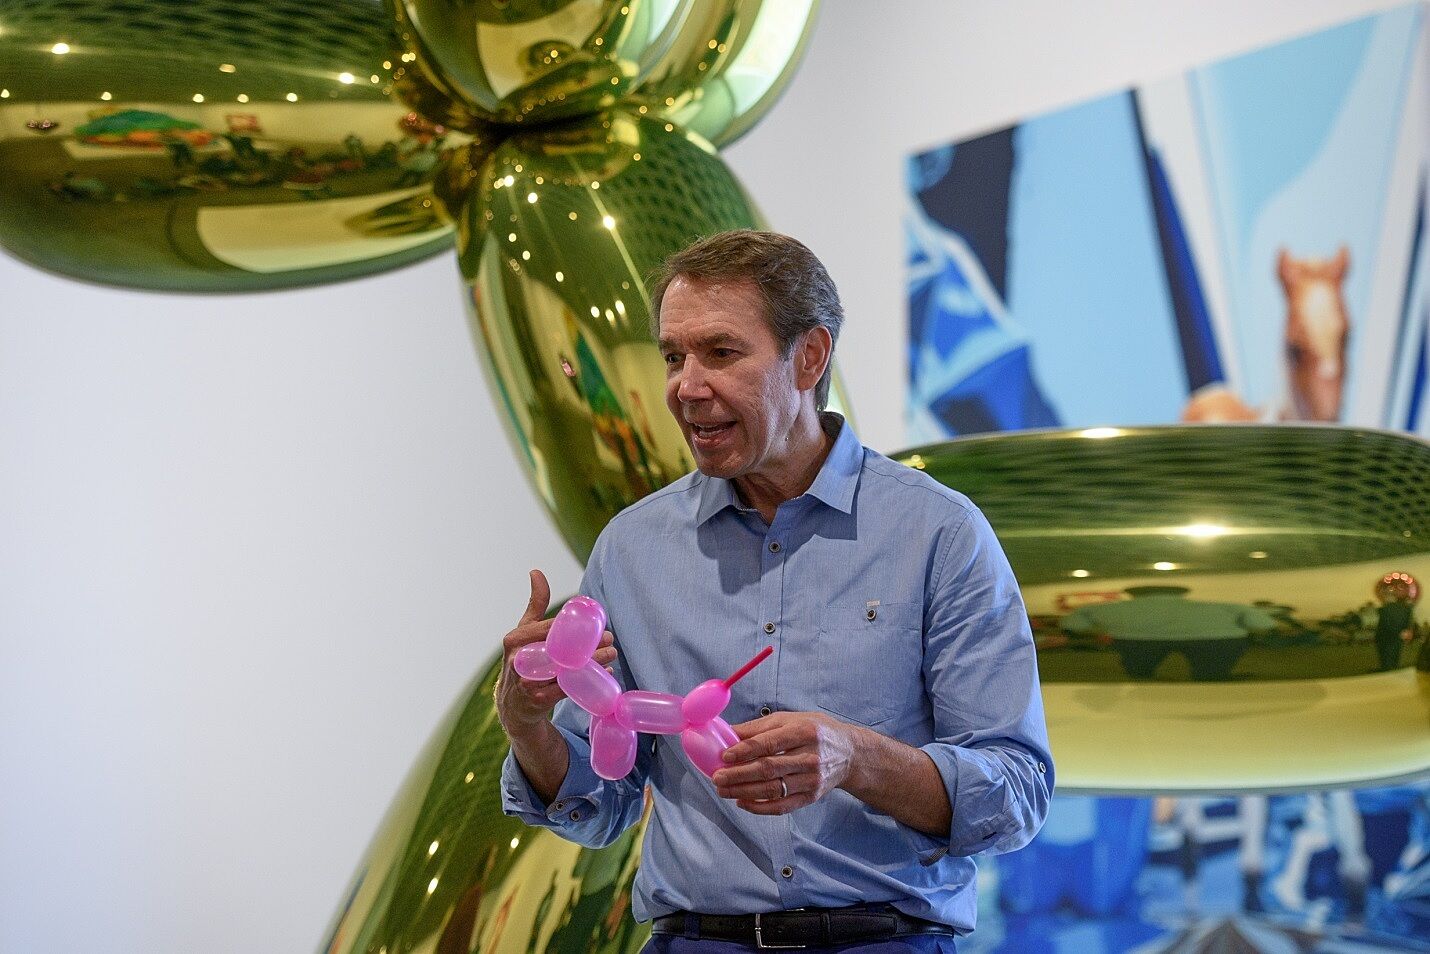 Artist Jeff Koons talking about one of his balloon projects.